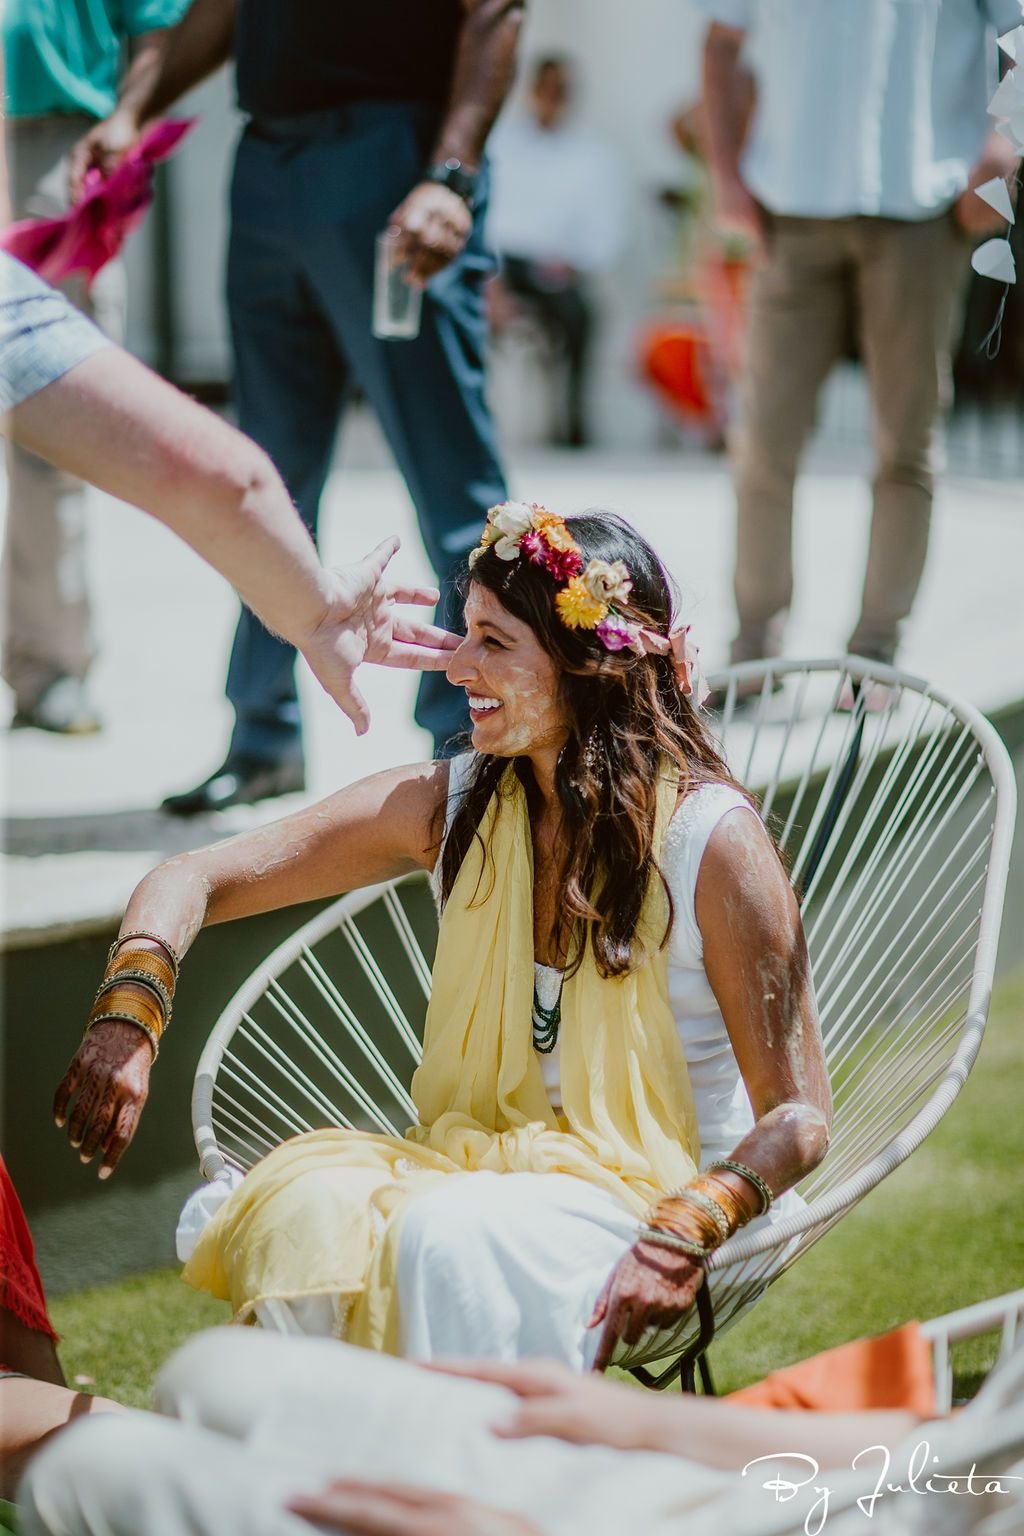 Bride getting turmeric on her during the Haldi Ceremony that took place in the morning at the Hilton Los Cabos. Cabo Wedding Services planned the whole Indian Wedding weekend.